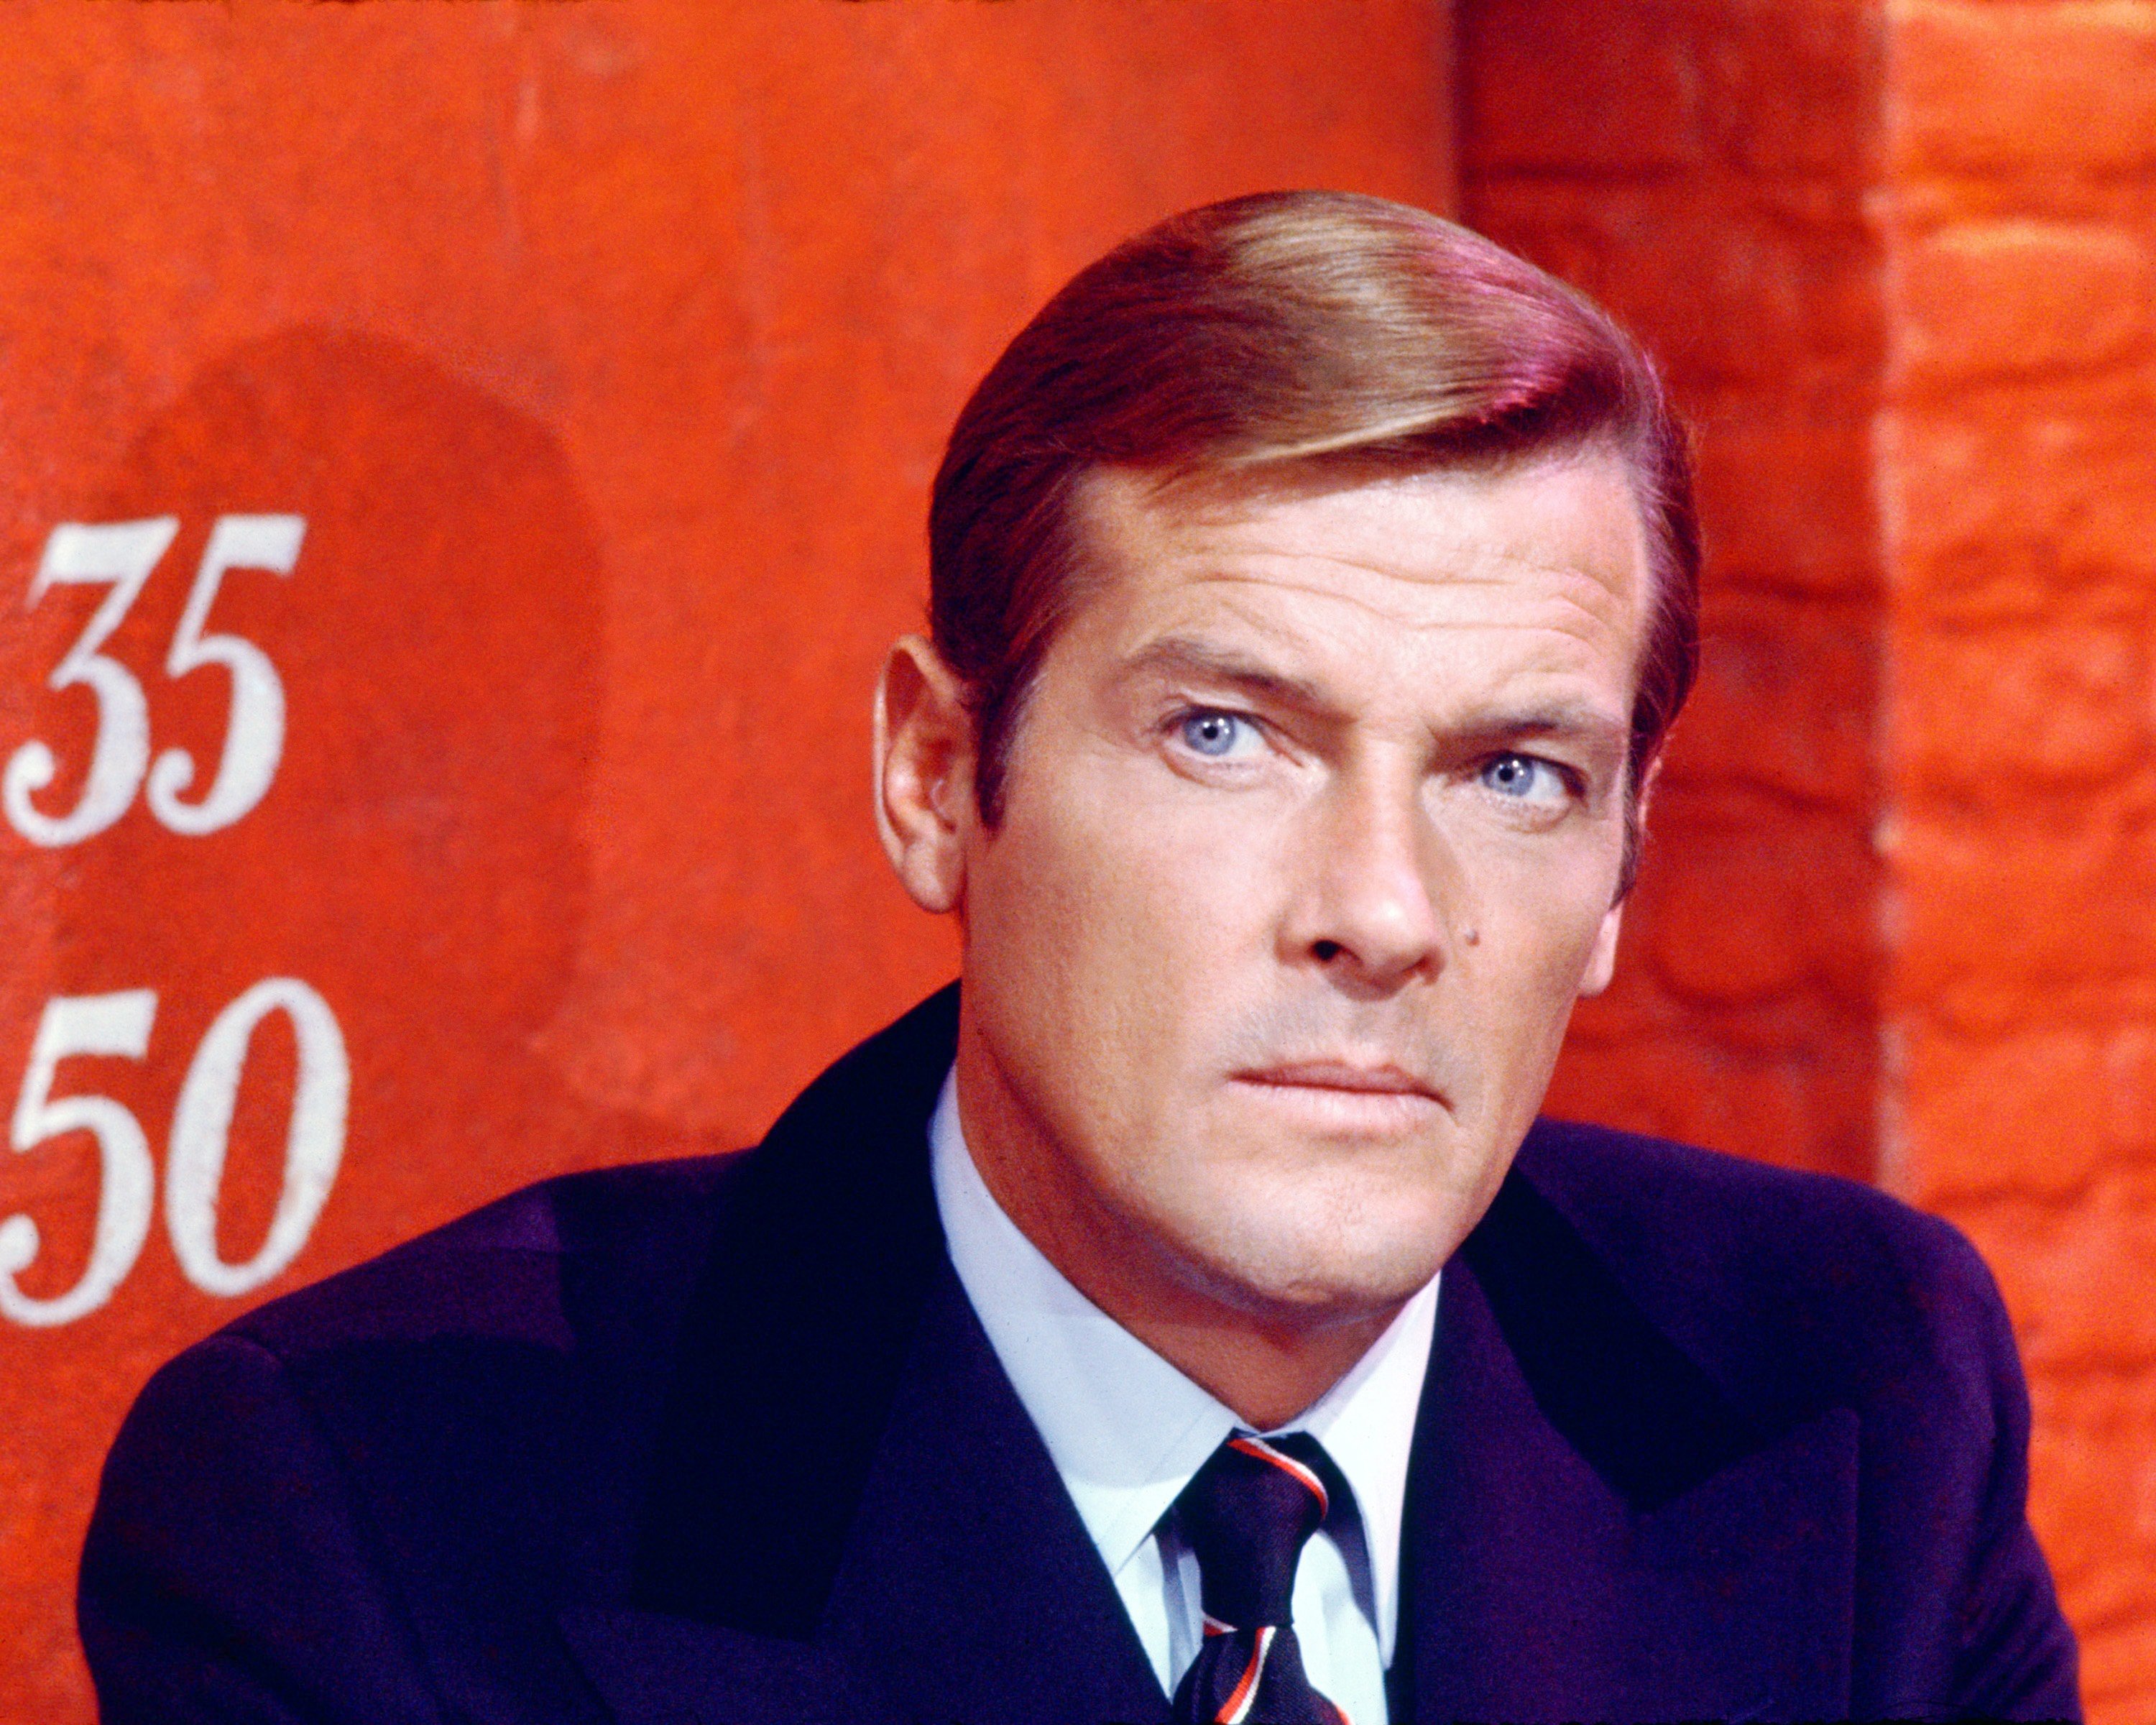 Roger Moore as James Bond in front of a red background